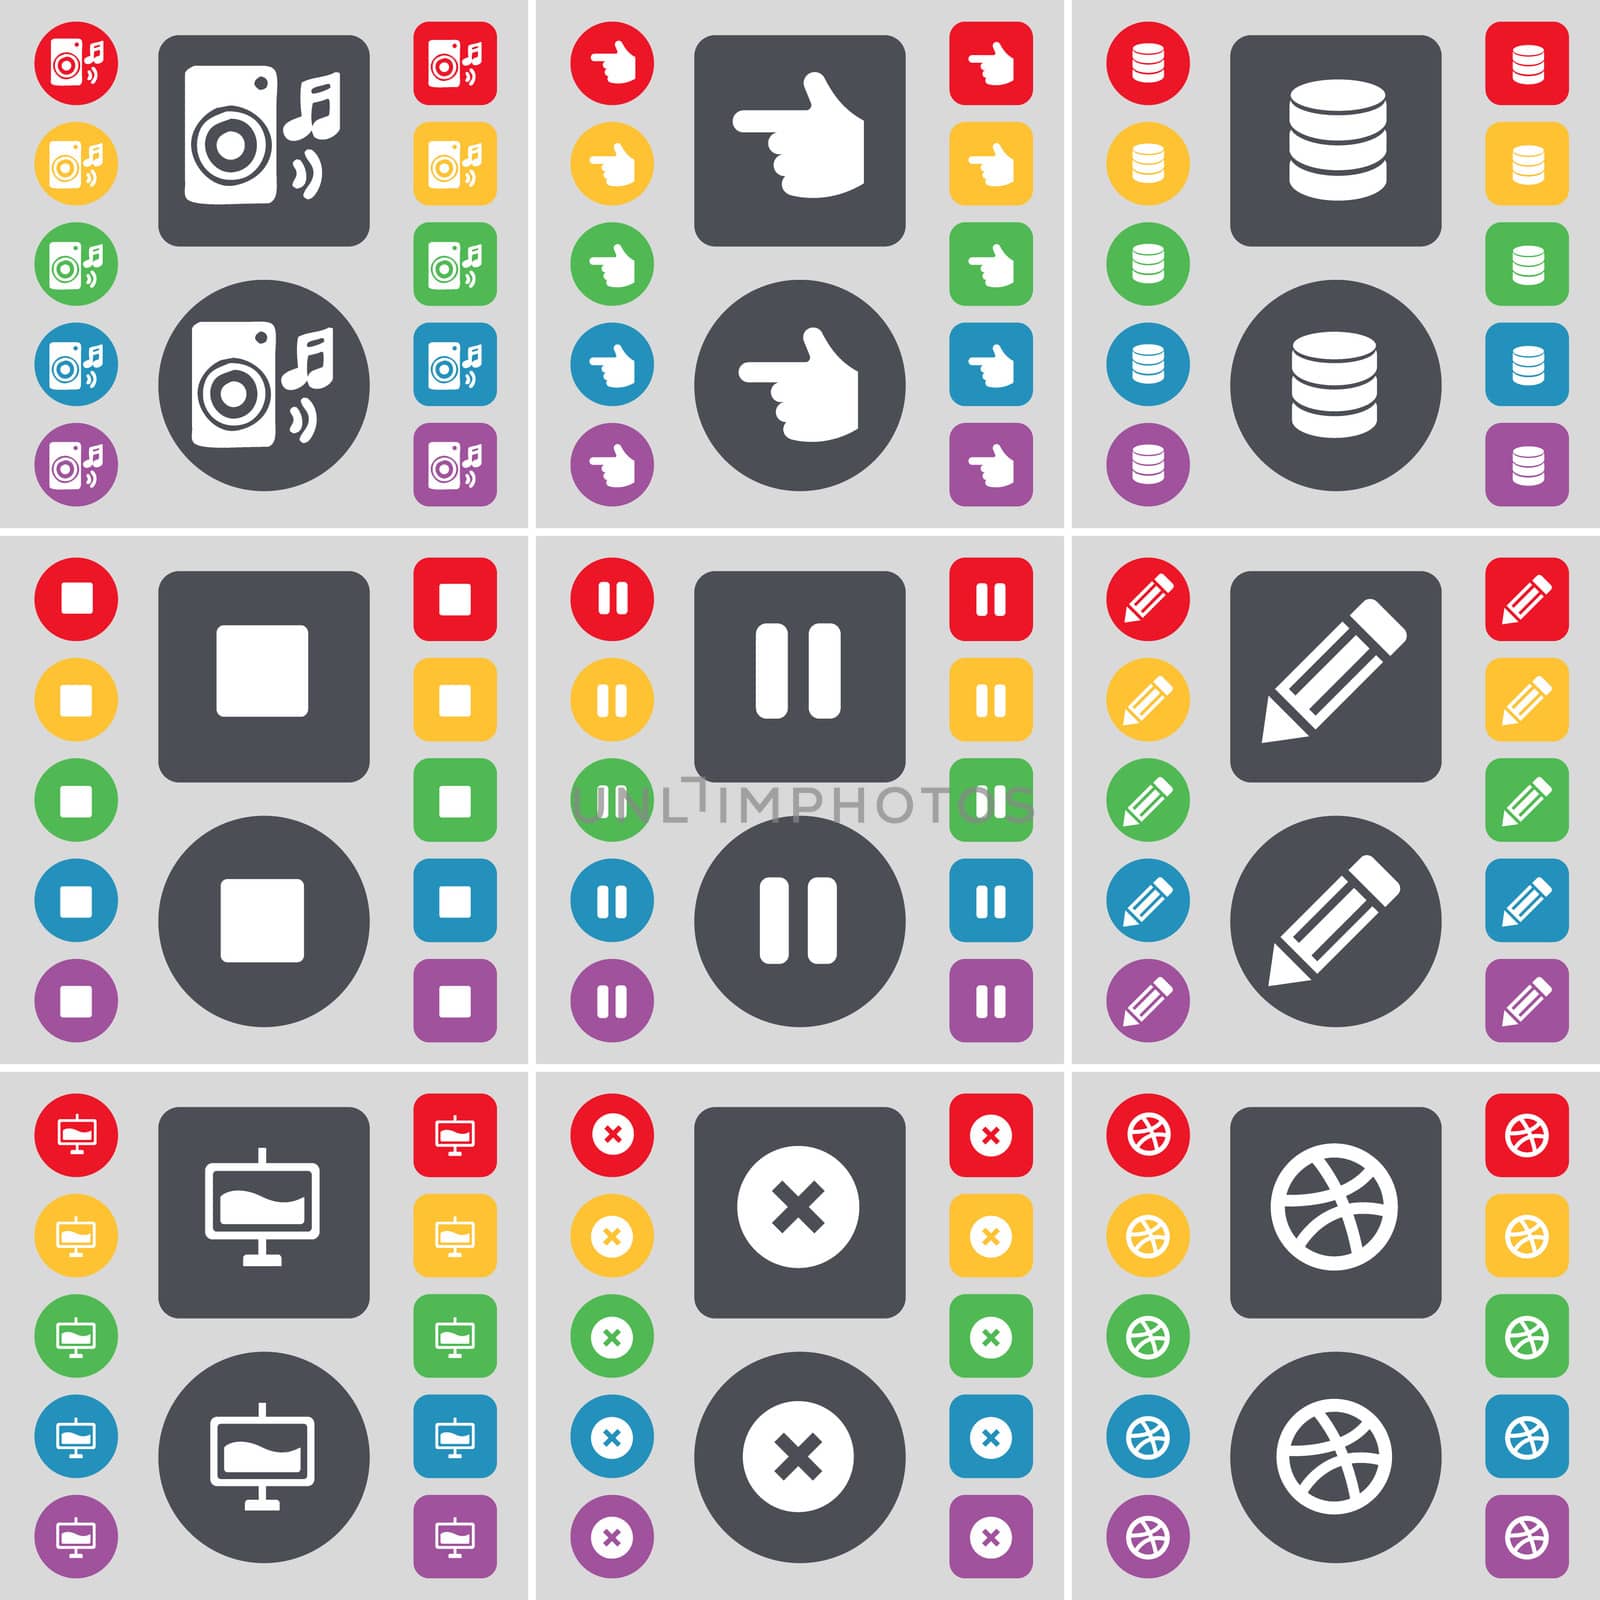 Speaker, Hand, Database, Media stop, Pause, Pencil, Graph, Stop, Ball icon symbol. A large set of flat, colored buttons for your design. illustration